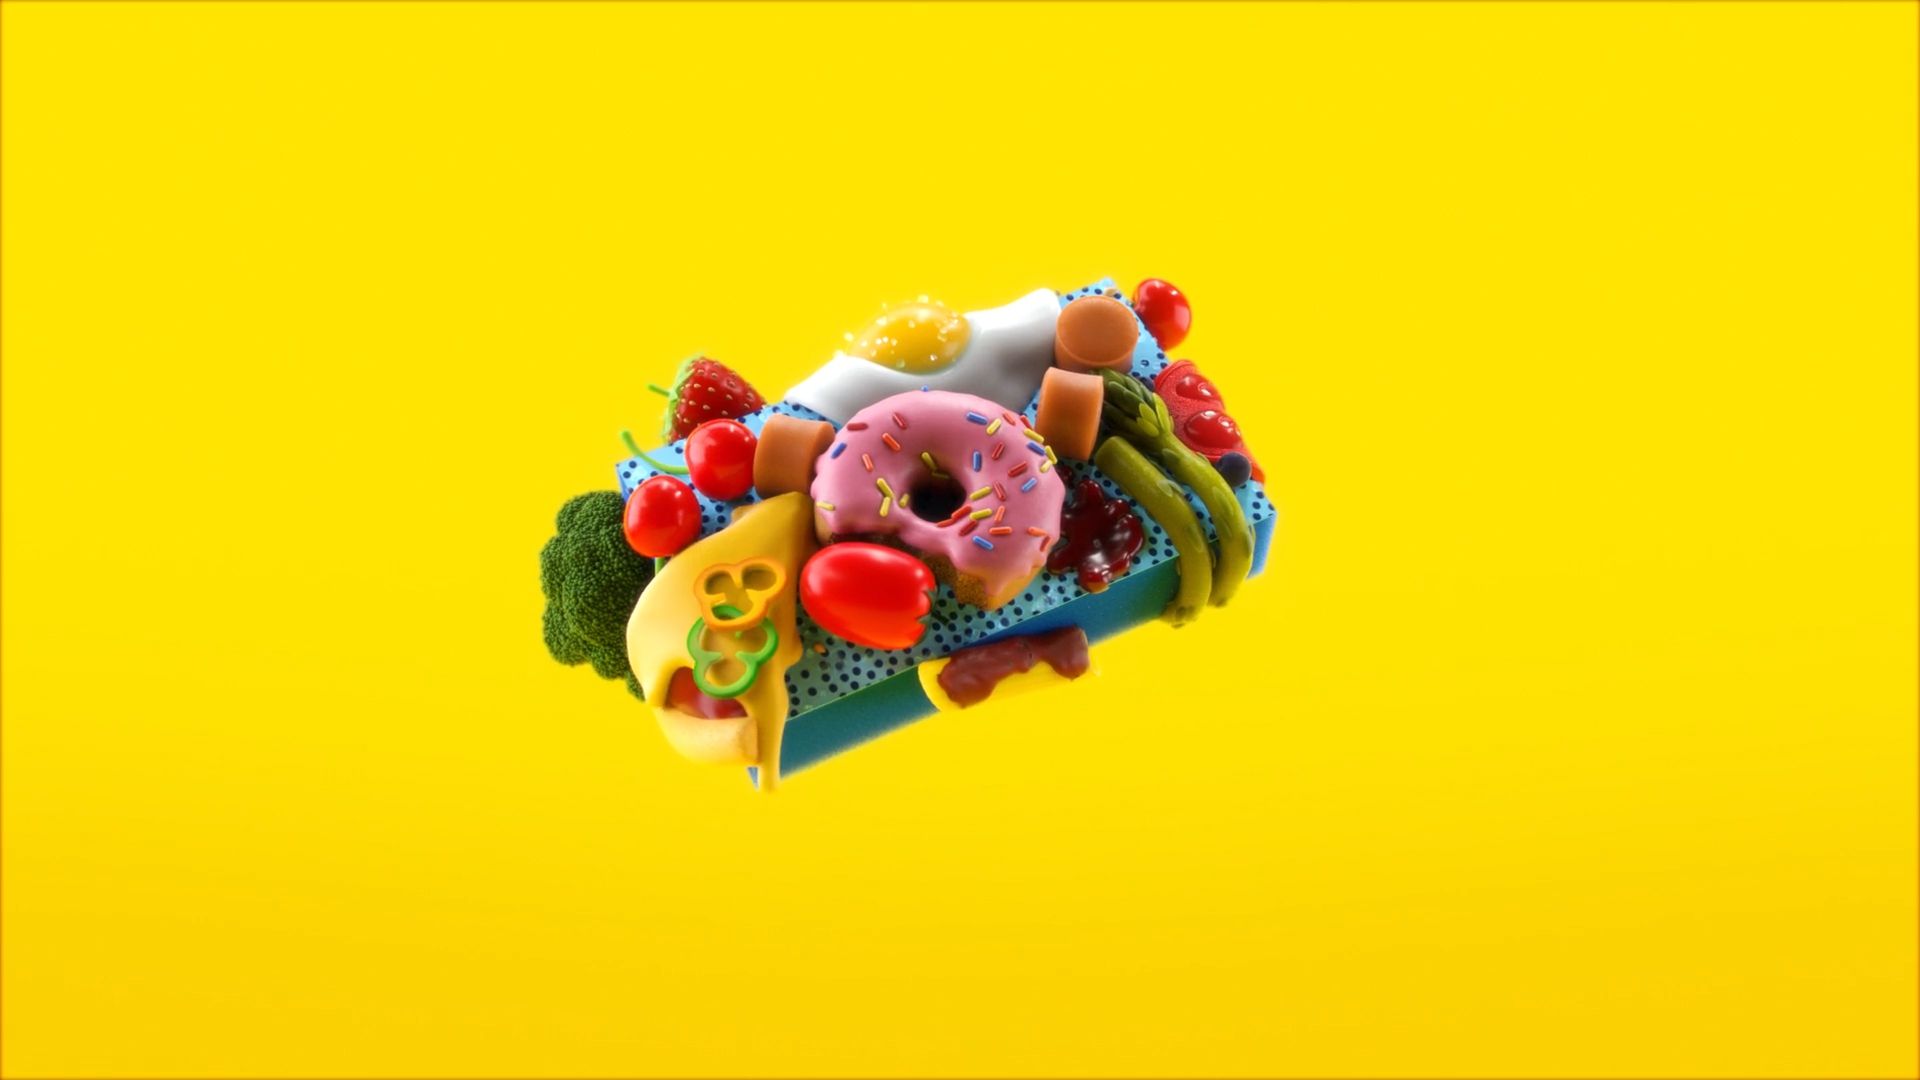 3D image of sponge covered in food